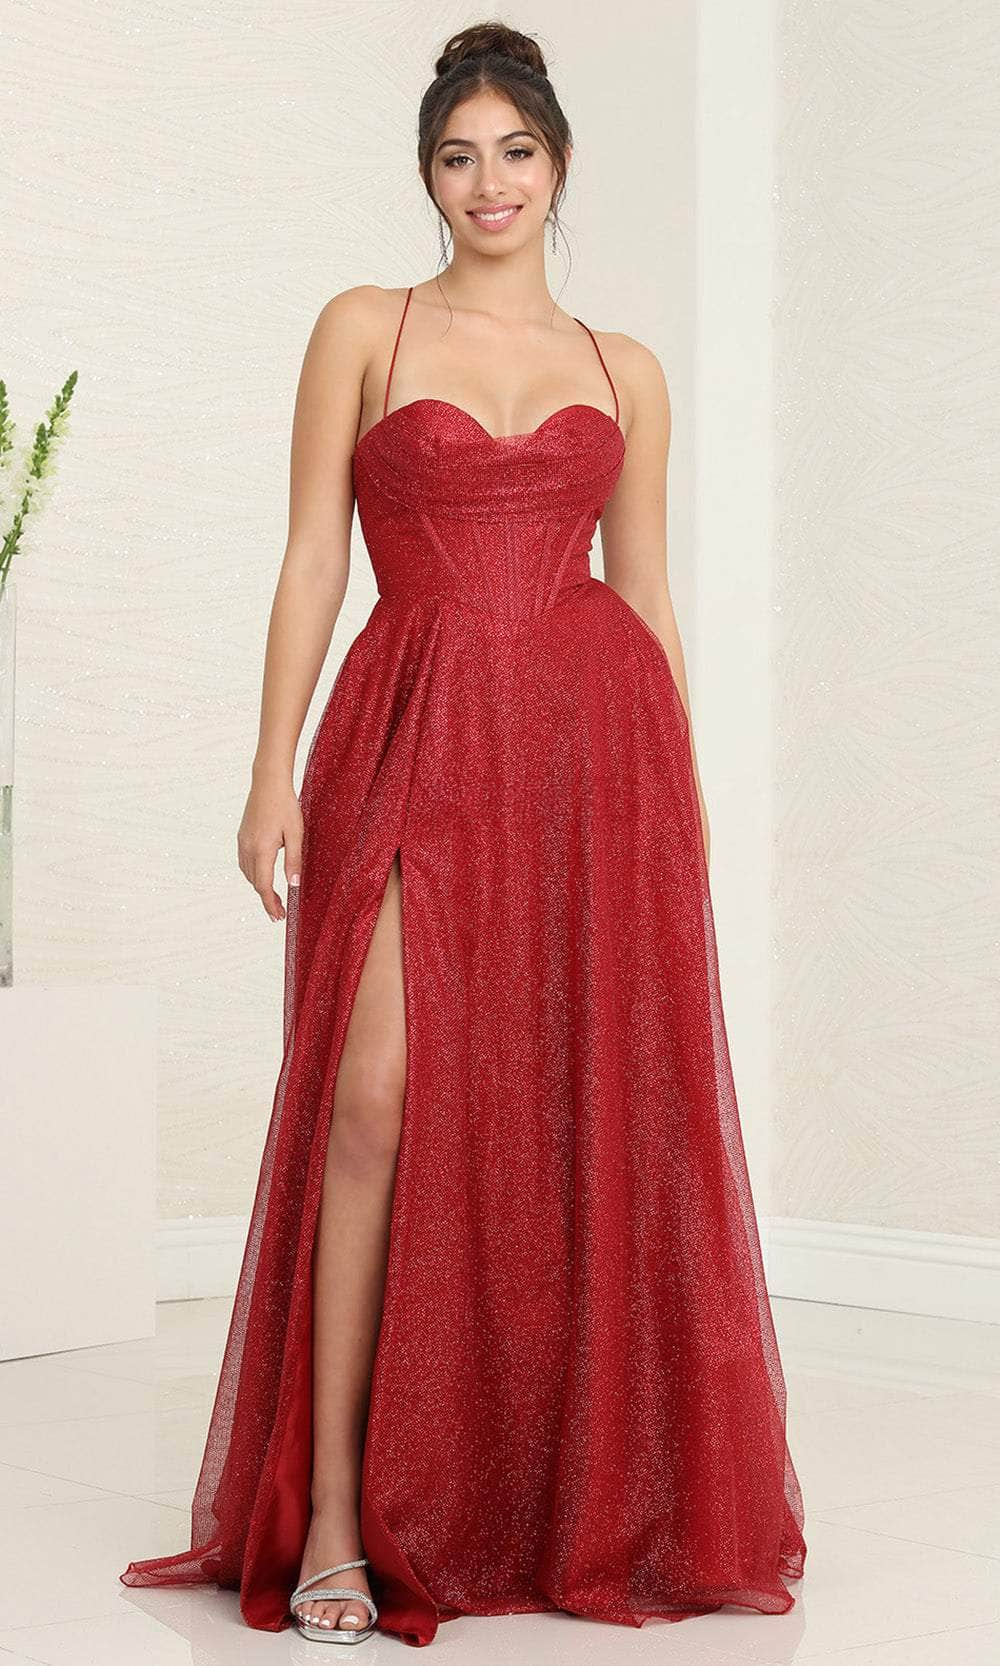 May Queen MQ2064 - Glittered A-Line Prom Gown Prom Dresses 4 / Burgundy